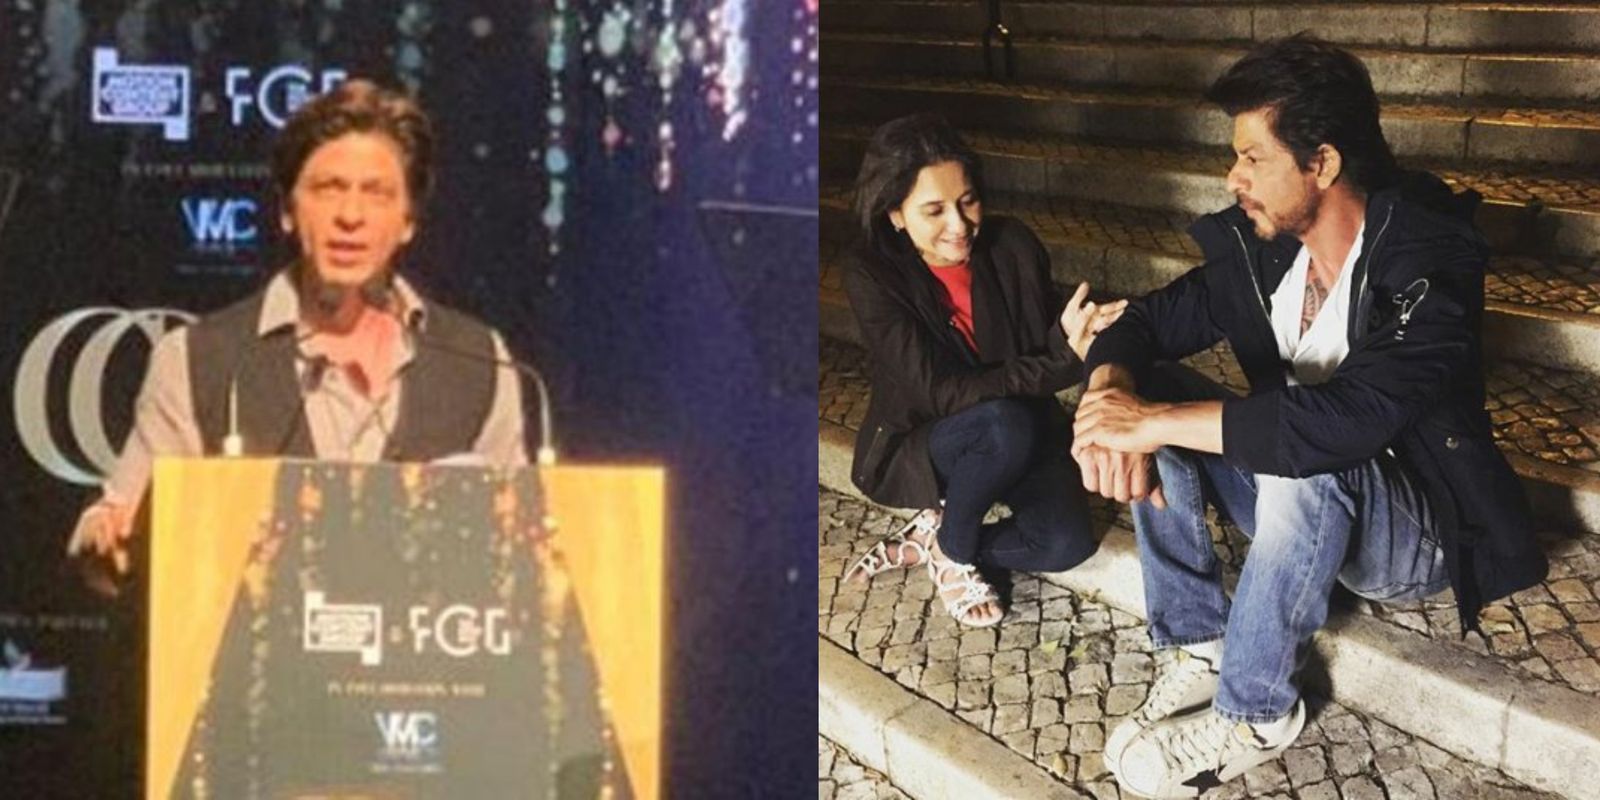 Shah Rukh Khan Roasts Critics And Friends Anupama Chopra And Rajeev Masand In The Most Lovable Way Possible!